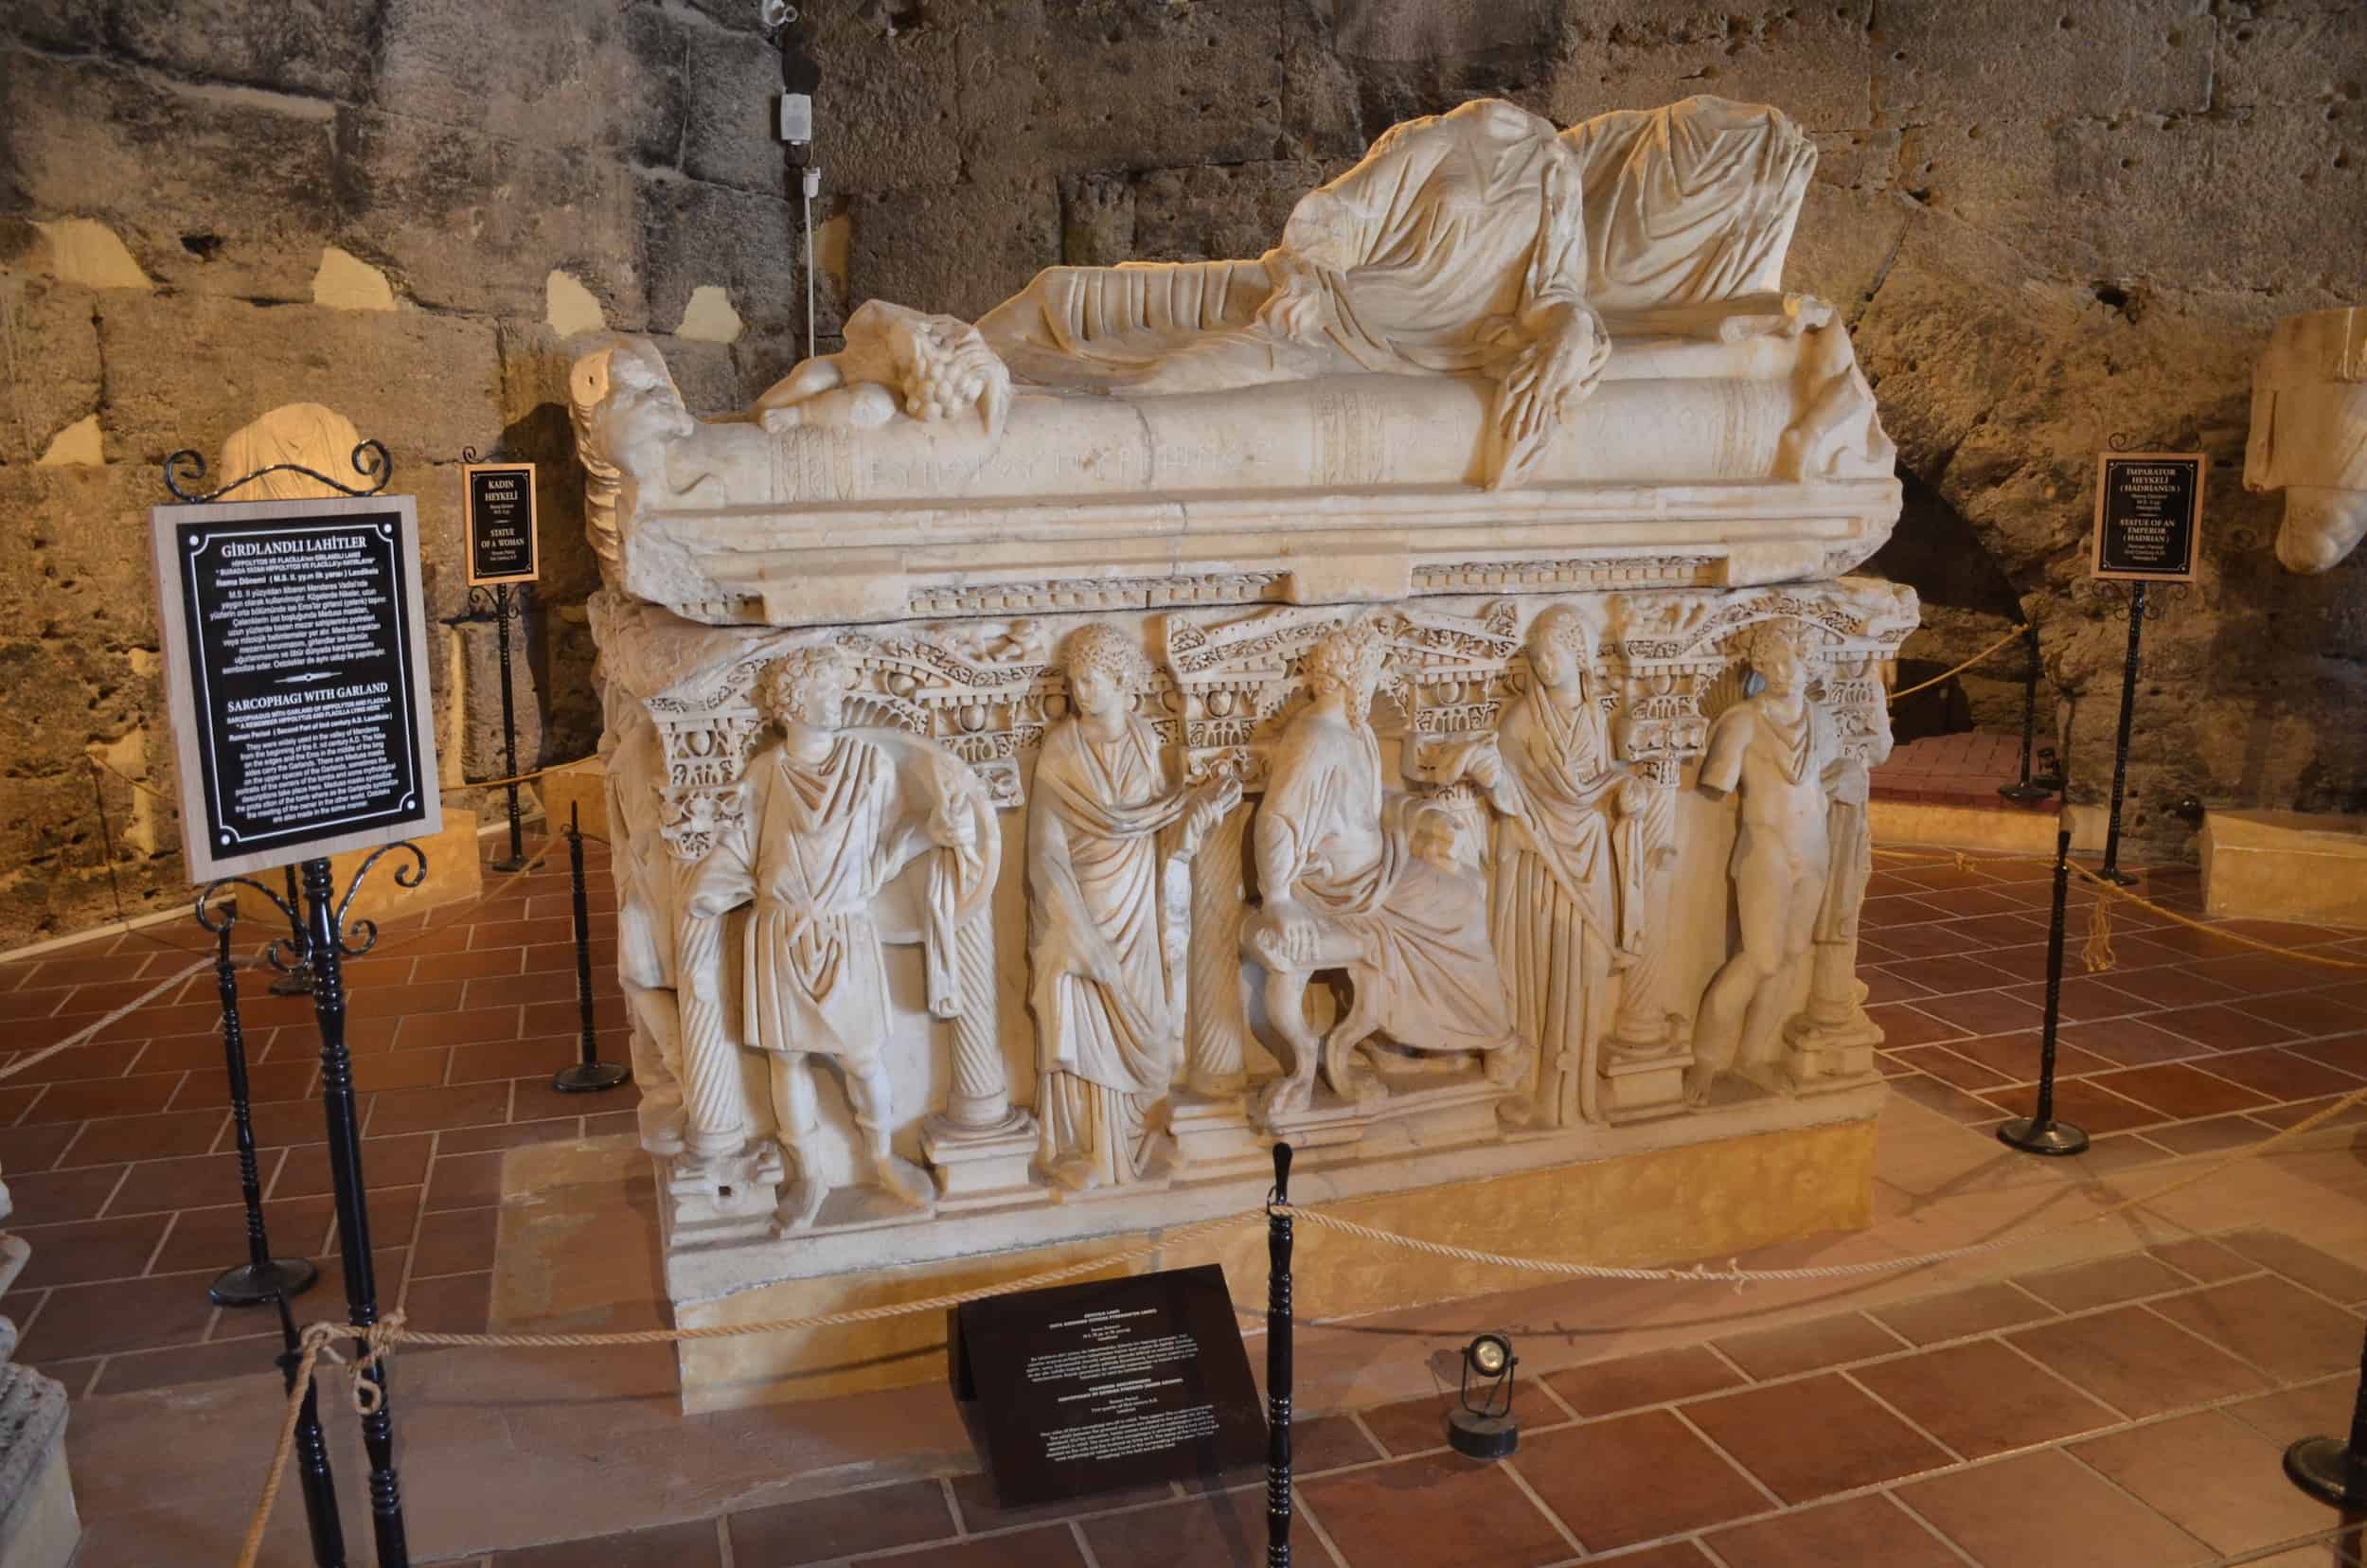 Columned sarcophagus of Euthios Pyrrhon (Asian Archon), Roman period, first quarter of the 3rd century, Laodicea in Sarcophagi and Statues at the Hierapolis Museum